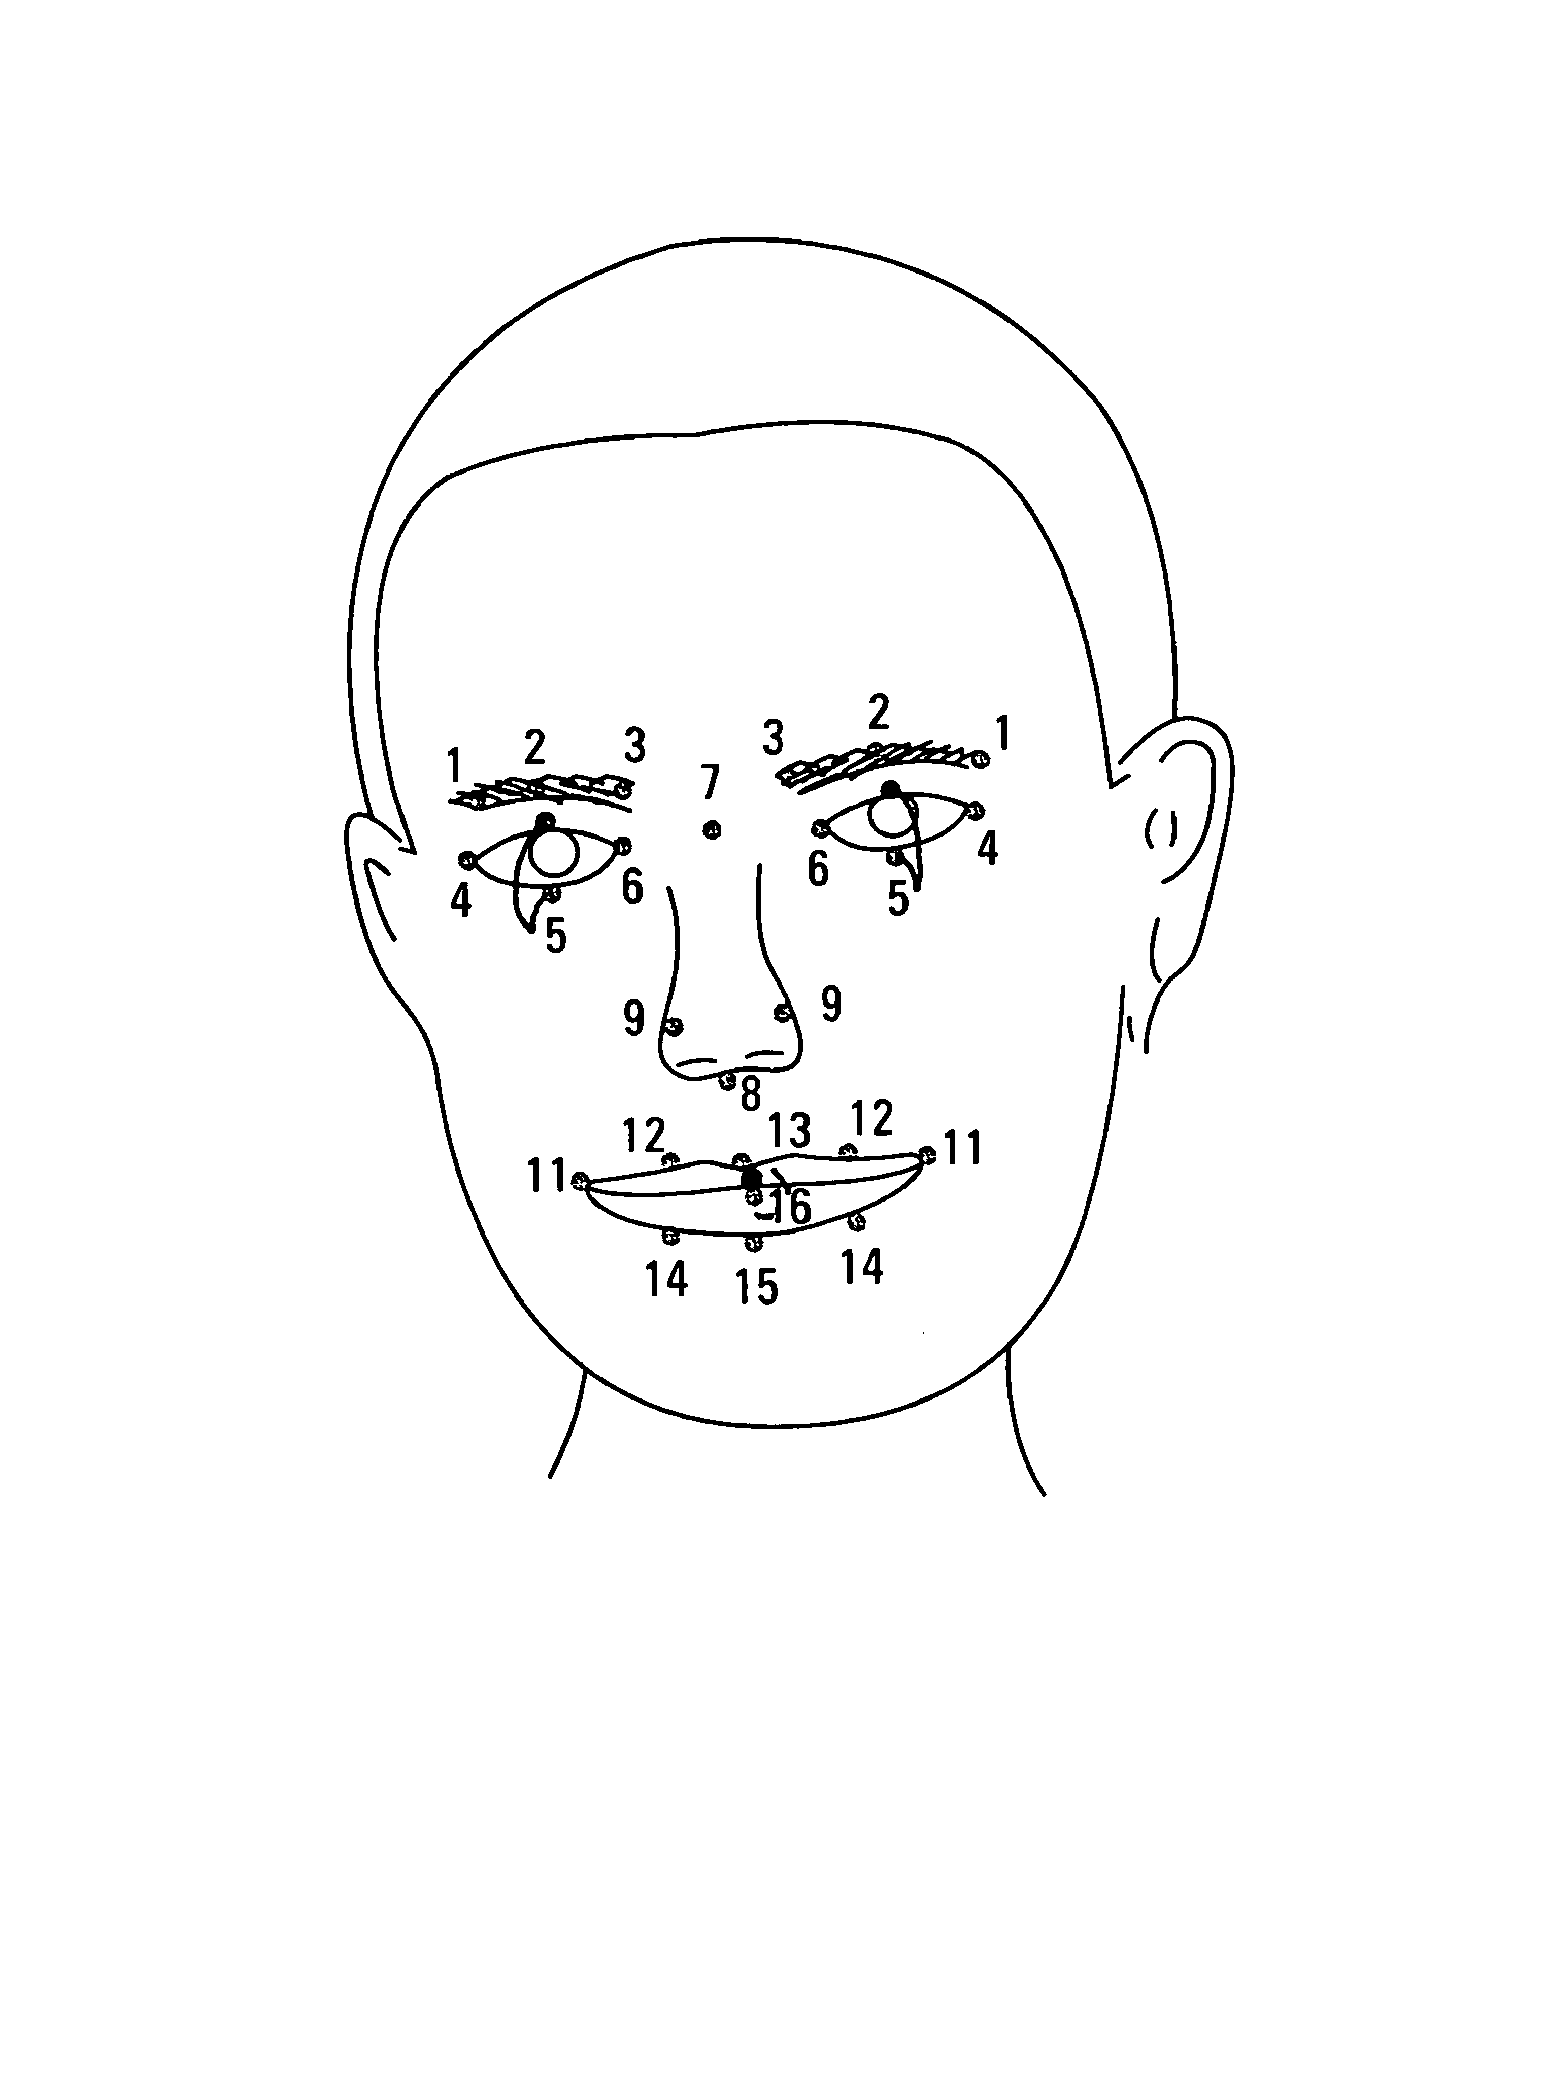 Computerized method of assessing consumer reaction to a business stimulus employing facial coding